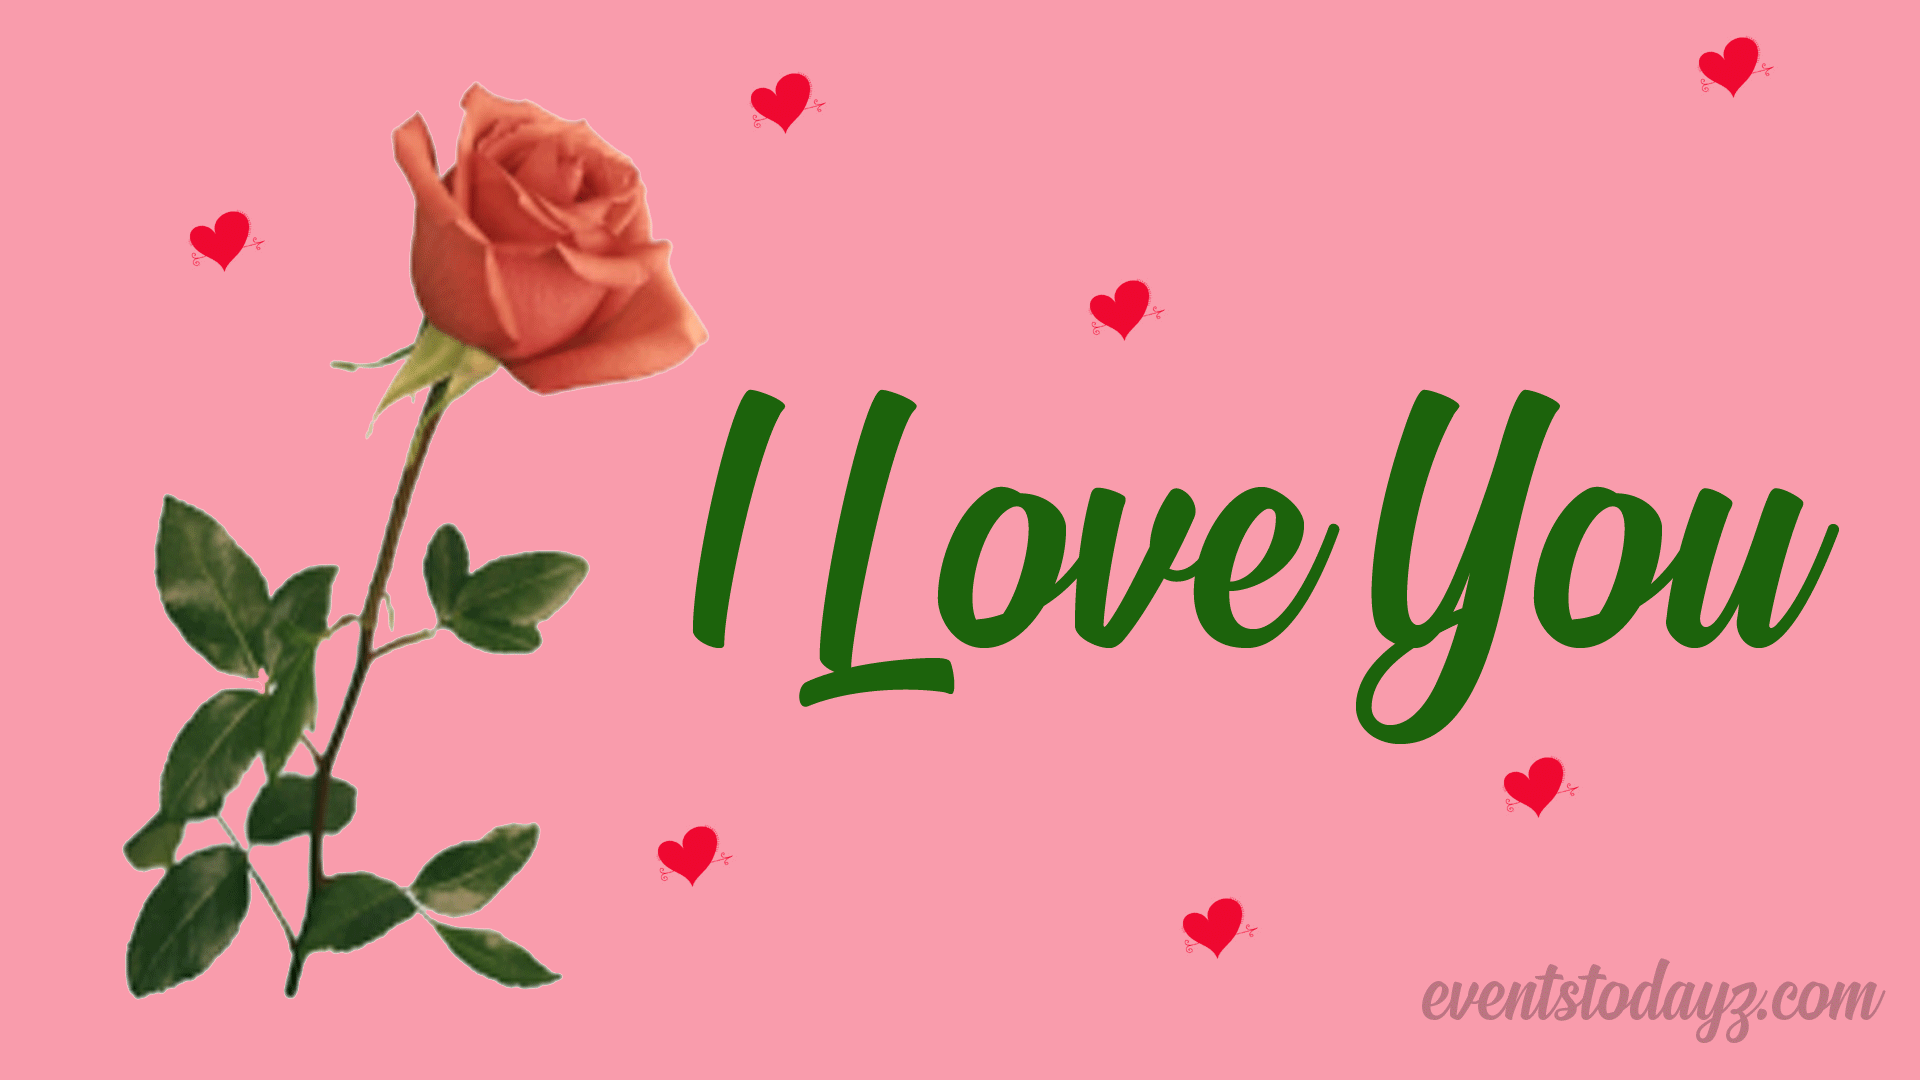 animated i love you quotes